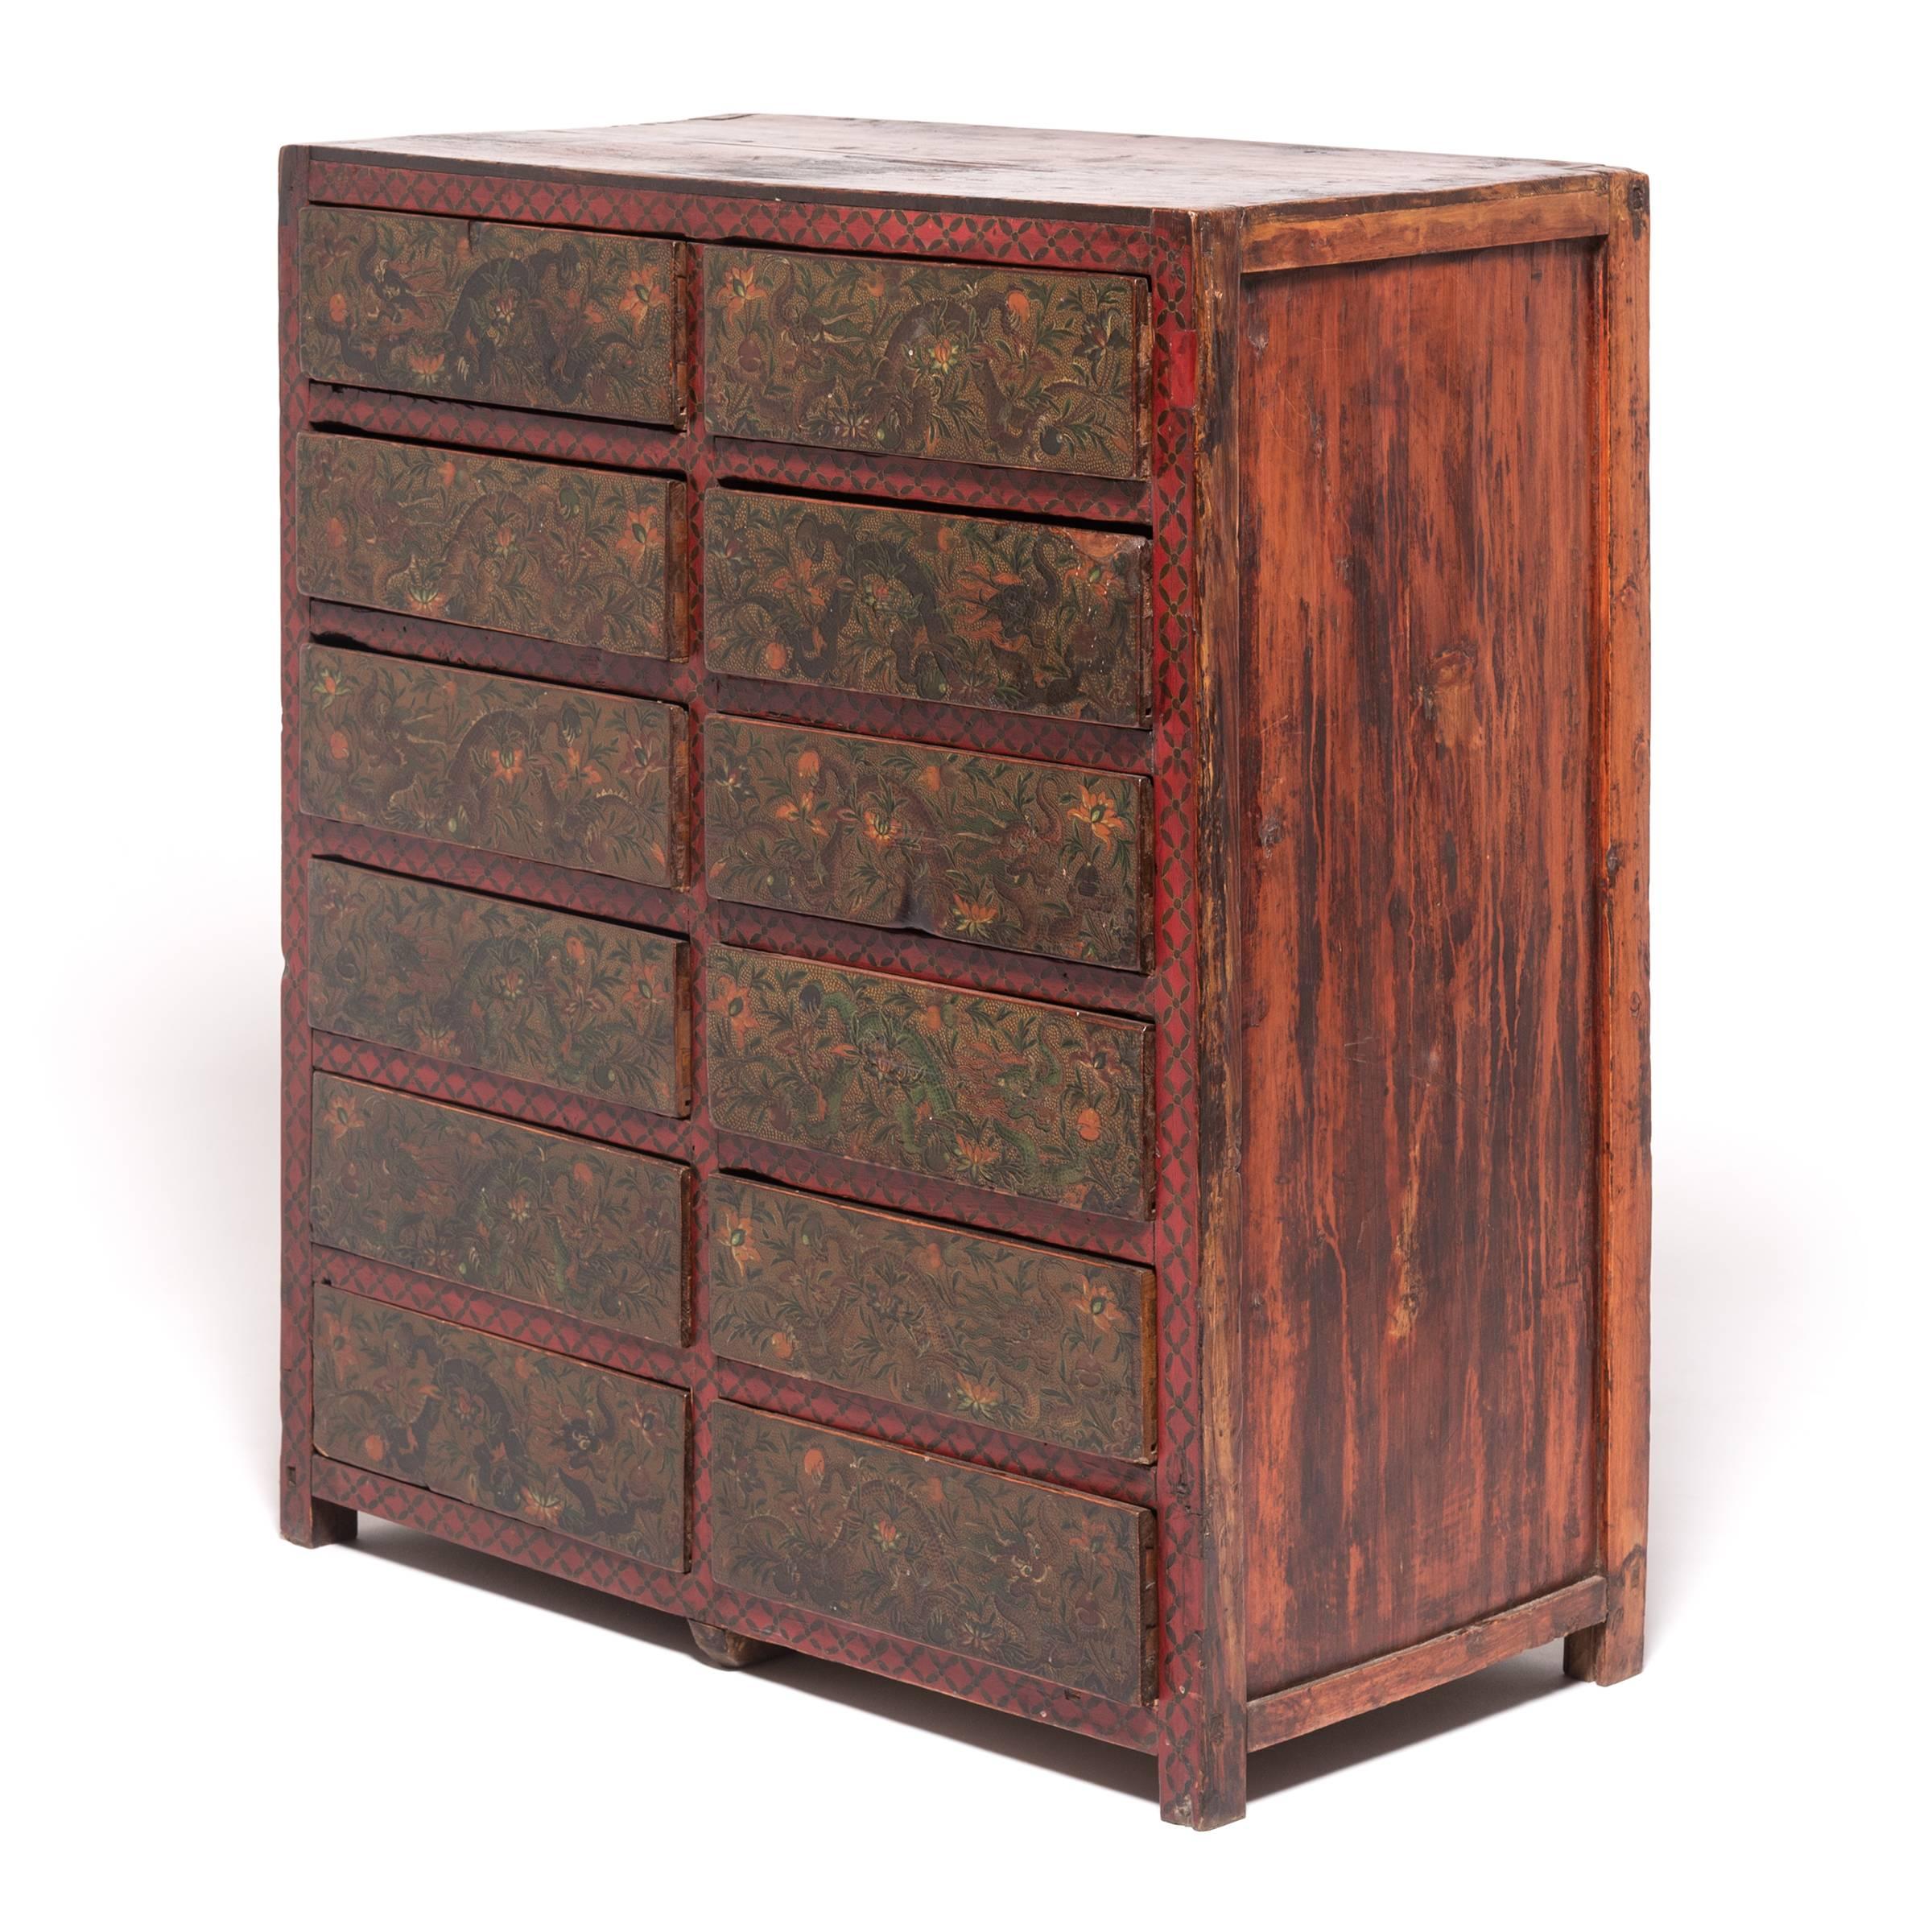 The number 12 figures prominently in Tibetan astrology, making this simple chest’s dozen drawers the perfect canvas for a Tibetan artisan to note the year of the dragon. Tibetan astrology recognizes a 12-year cycle, characterized by 12 animals,